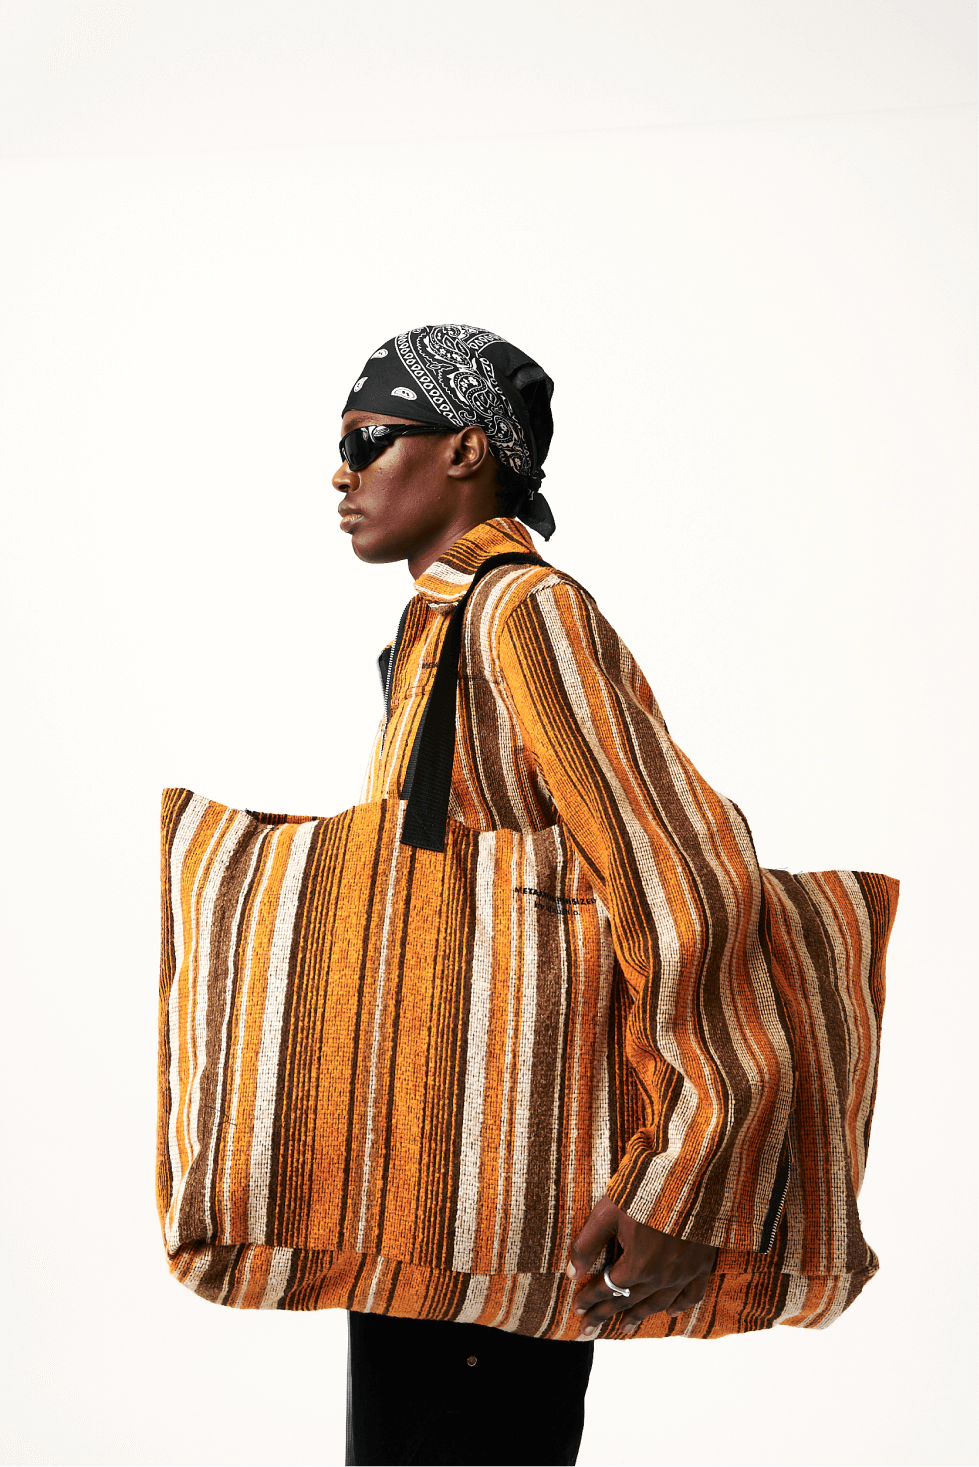 Shop Sisal Travel Tote Bag by Metamorphisized on Arrai. Discover stylish, affordable clothing, jewelry, handbags and unique handmade pieces from top Kenyan & African fashion brands prioritising sustainability and quality craftsmanship.